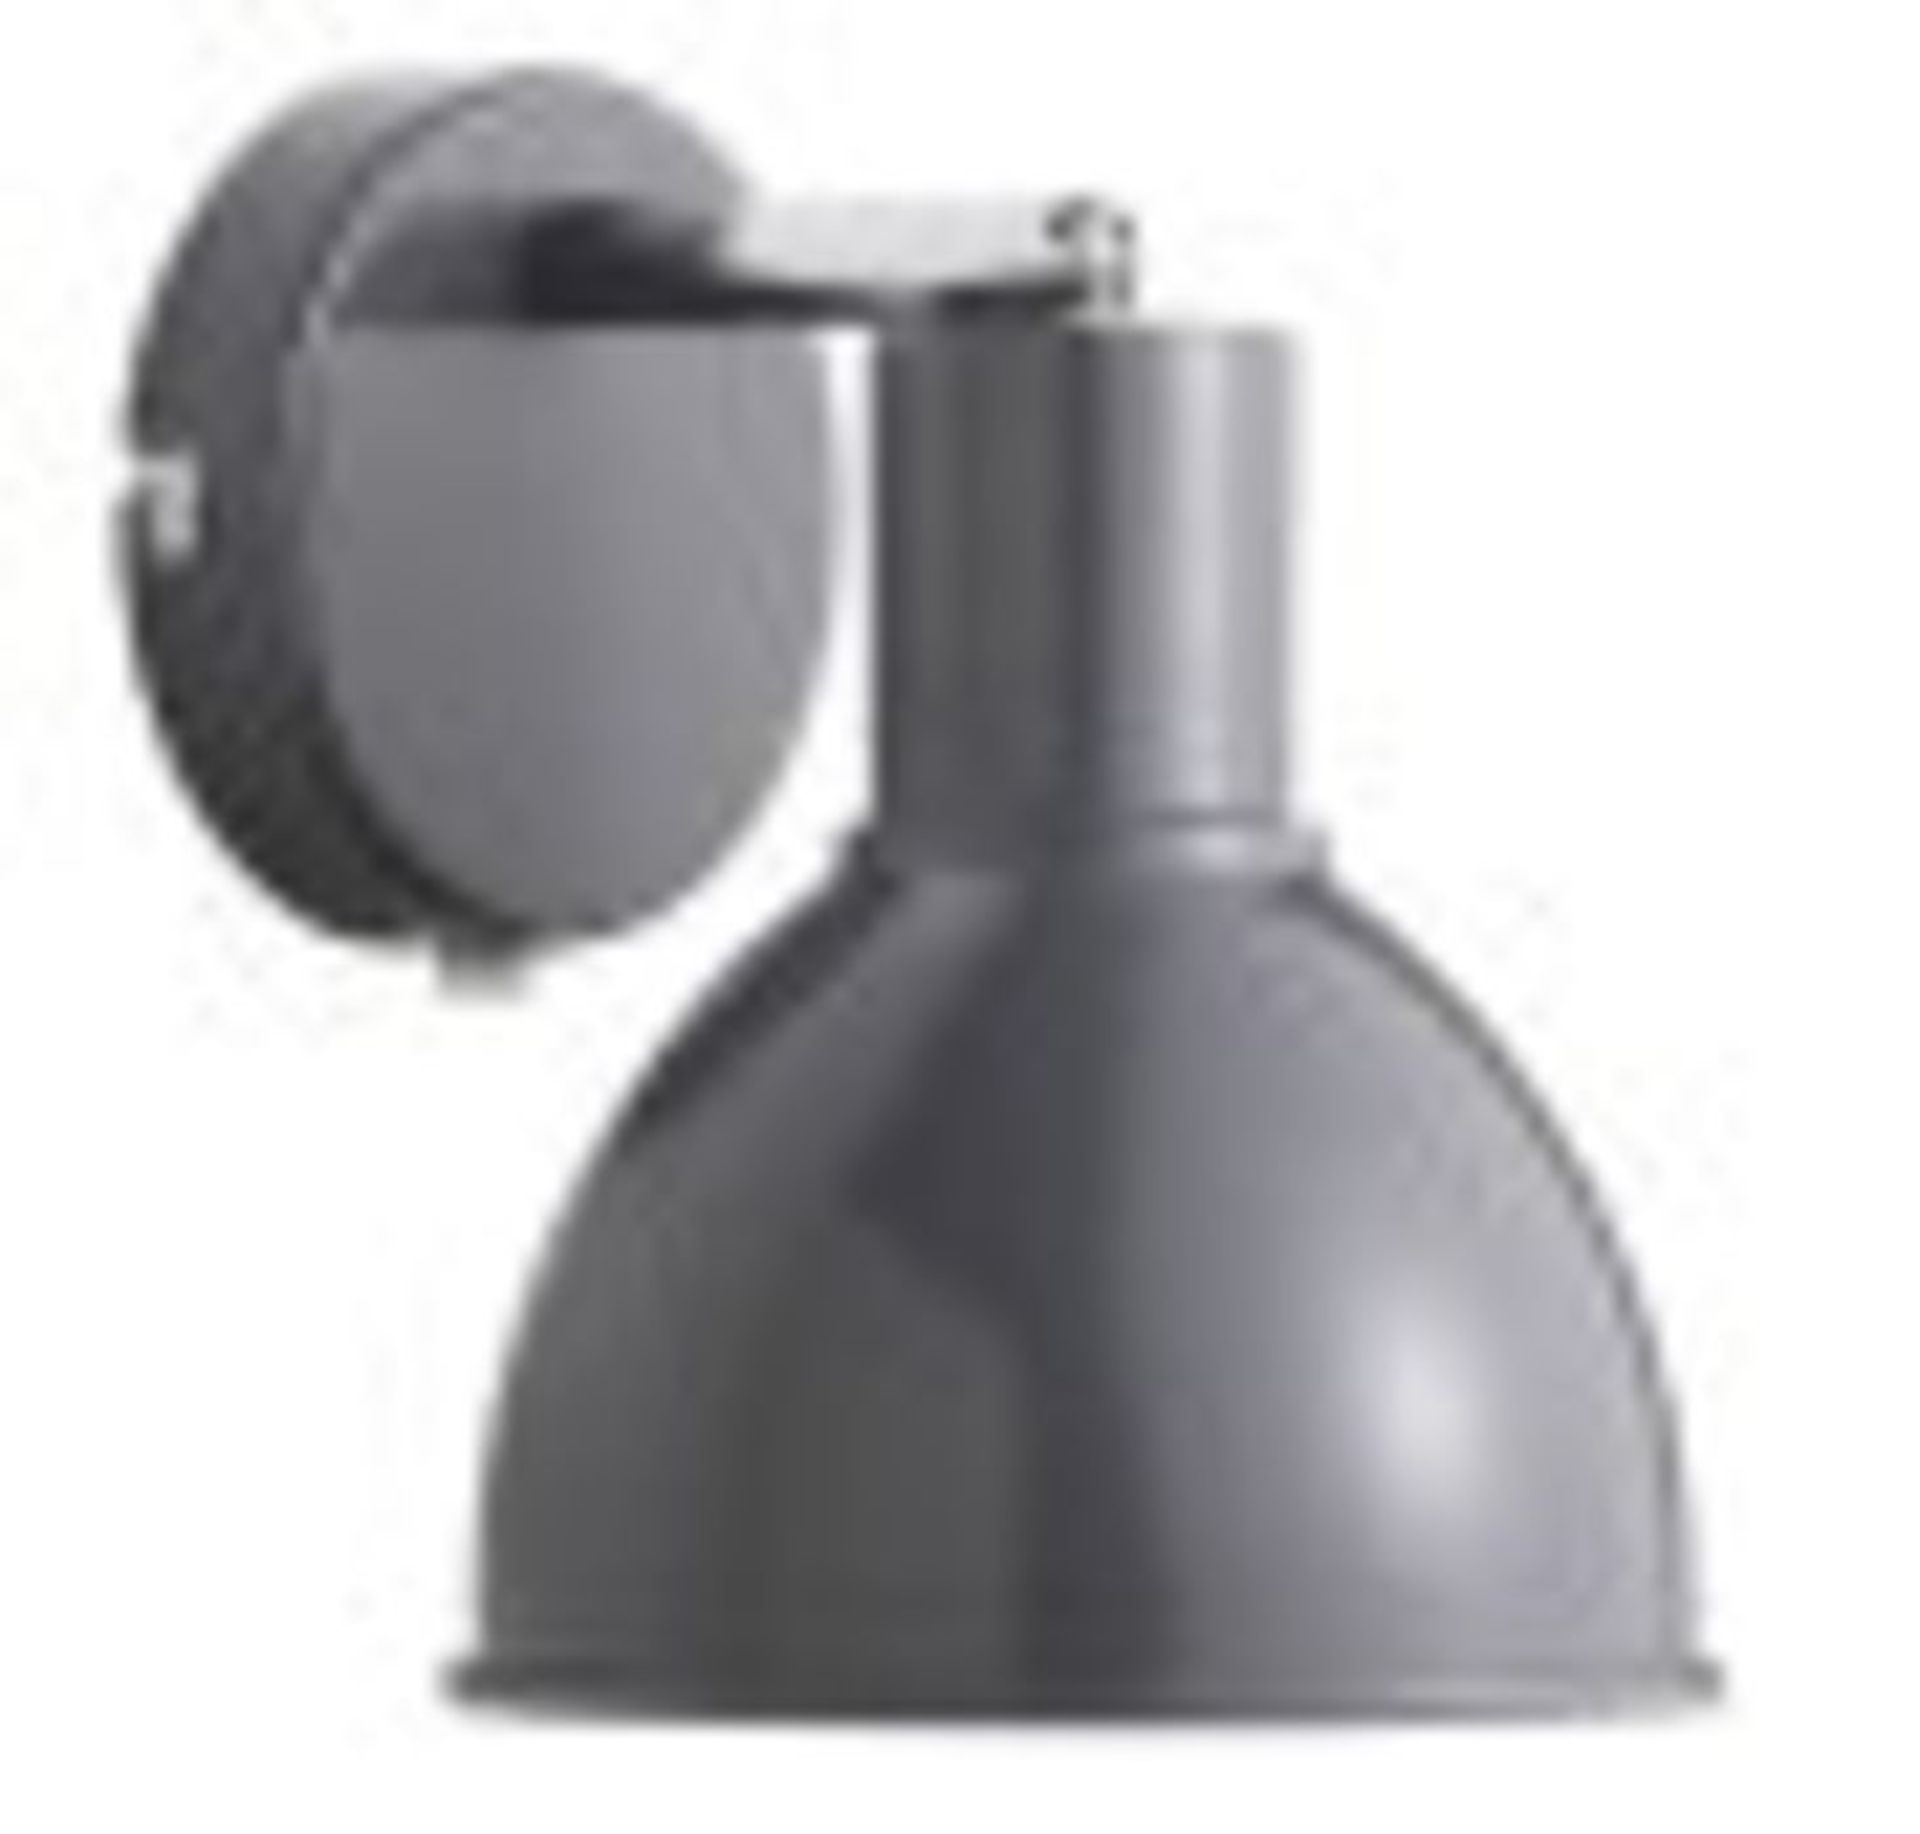 Nordlux Pop 1-Light Armed Sconce (ANTHRACITE) RRP - £34.99 (NDX3026 - 7411/31) 2F - Image 3 of 3